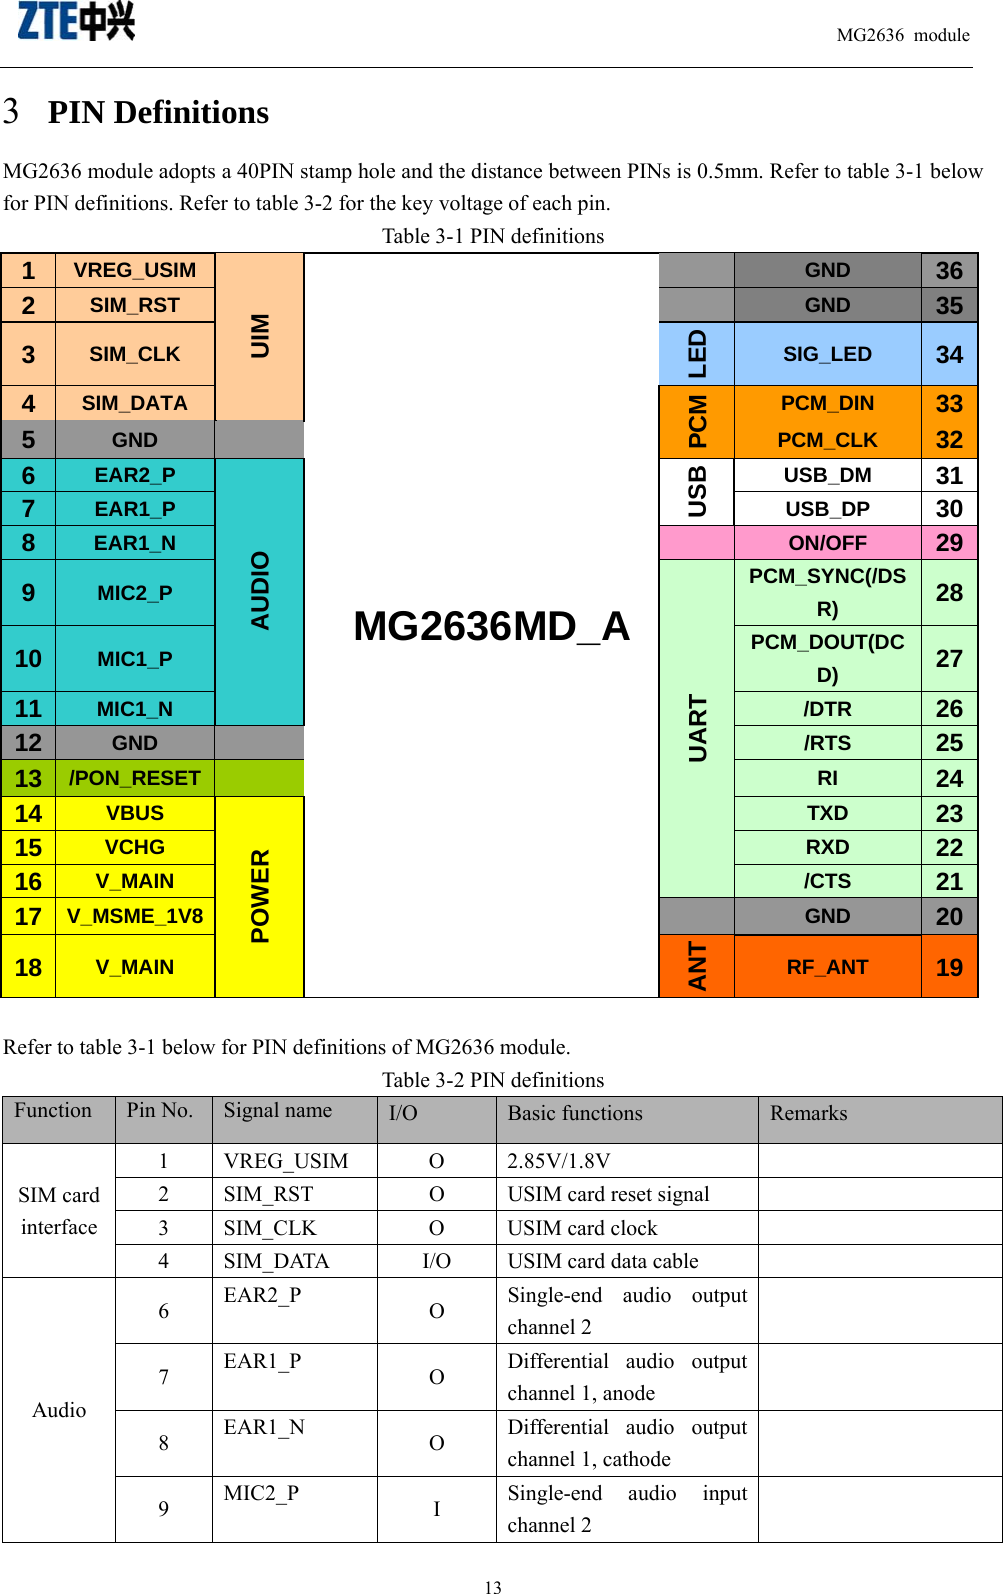                                                                          MG2636 module                                                    133 PIN Definitions MG2636 module adopts a 40PIN stamp hole and the distance between PINs is 0.5mm. Refer to table 3-1 below for PIN definitions. Refer to table 3-2 for the key voltage of each pin. Table 3-1 PIN definitions 1  VREG_USIM UIM  MG2636MD_A  GND  362  SIM_RST  GND  353  SIM_CLK LED SIG_LED  344  SIM_DATA PCM PCM_DIN  335  GND  PCM_CLK  326  EAR2_P AUDIO USB USB_DM  317  EAR1_P  USB_DP  308  EAR1_N  ON/OFF  299  MIC2_P UART PCM_SYNC(/DSR)  2810  MIC1_P  PCM_DOUT(DCD)  2711  MIC1_N  /DTR  2612  GND  /RTS  2513  /PON_RESET  RI  2414  VBUS POWER TXD  2315  VCHG  RXD  2216  V_MAIN  /CTS  2117  V_MSME_1V8  GND  2018  V_MAIN ANT RF_ANT  19 Refer to table 3-1 below for PIN definitions of MG2636 module.     Table 3-2 PIN definitions Function Pin No. Signal name I/O Basic functions Remarks SIM card interface 1 VREG_USIM  O  2.85V/1.8V    2  SIM_RST  O  USIM card reset signal     3  SIM_CLK  O  USIM card clock     4  SIM_DATA  I/O  USIM card data cable     Audio 6  EAR2_P  O  Single-end audio output channel 2  7  EAR1_P  O  Differential audio output channel 1, anode    8  EAR1_N  O  Differential audio output channel 1, cathode    9  MIC2_P  I  Single-end audio input channel 2  